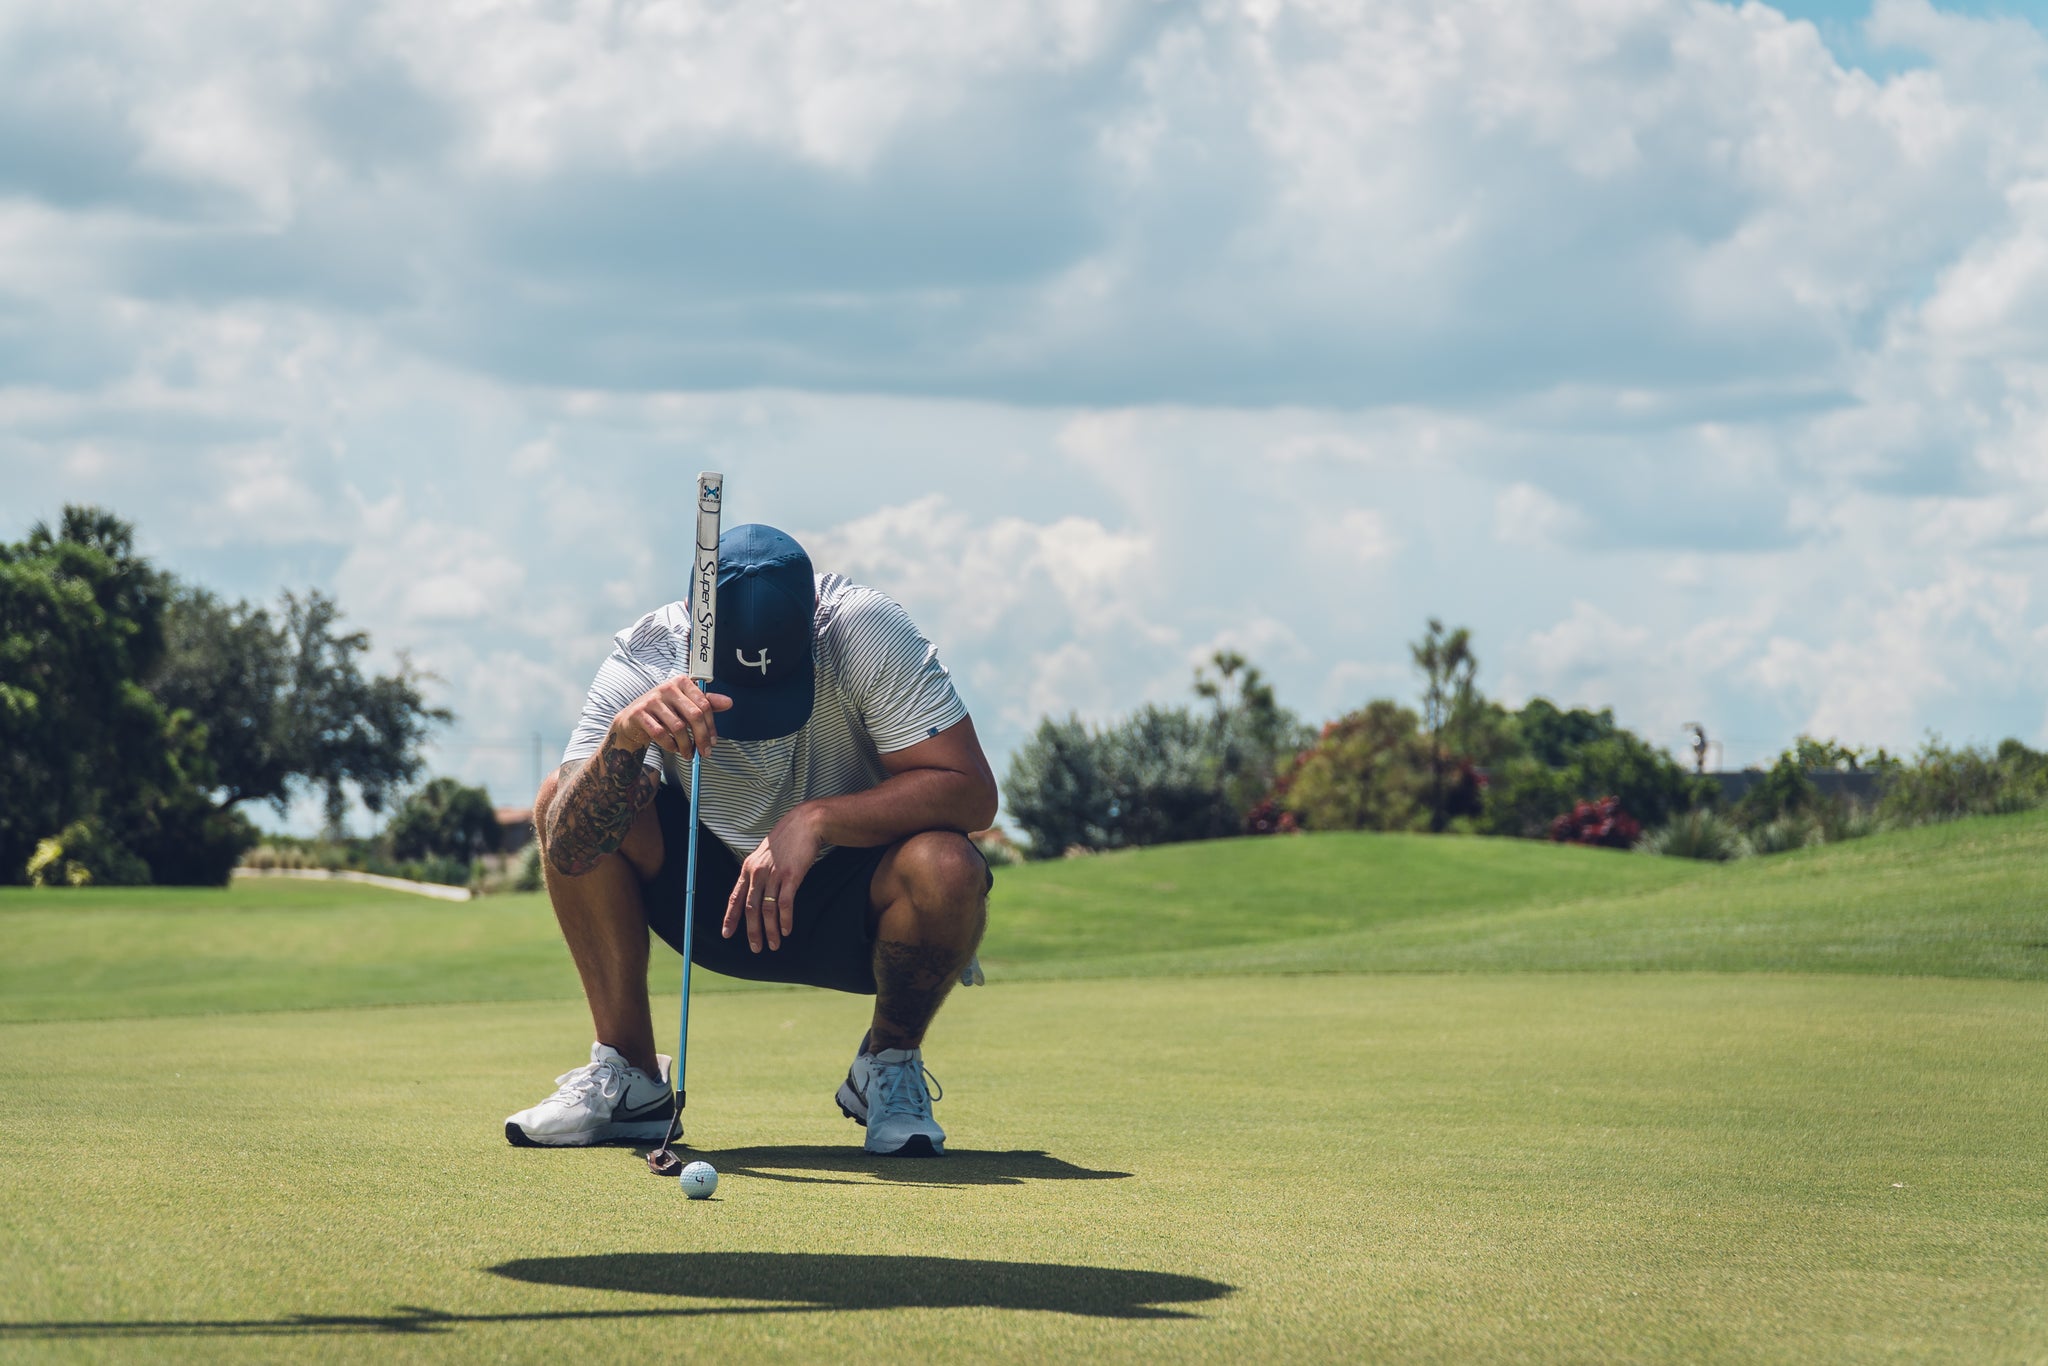 Golf and Technology: Exploring the Latest Innovations and Gadgets for Golfers